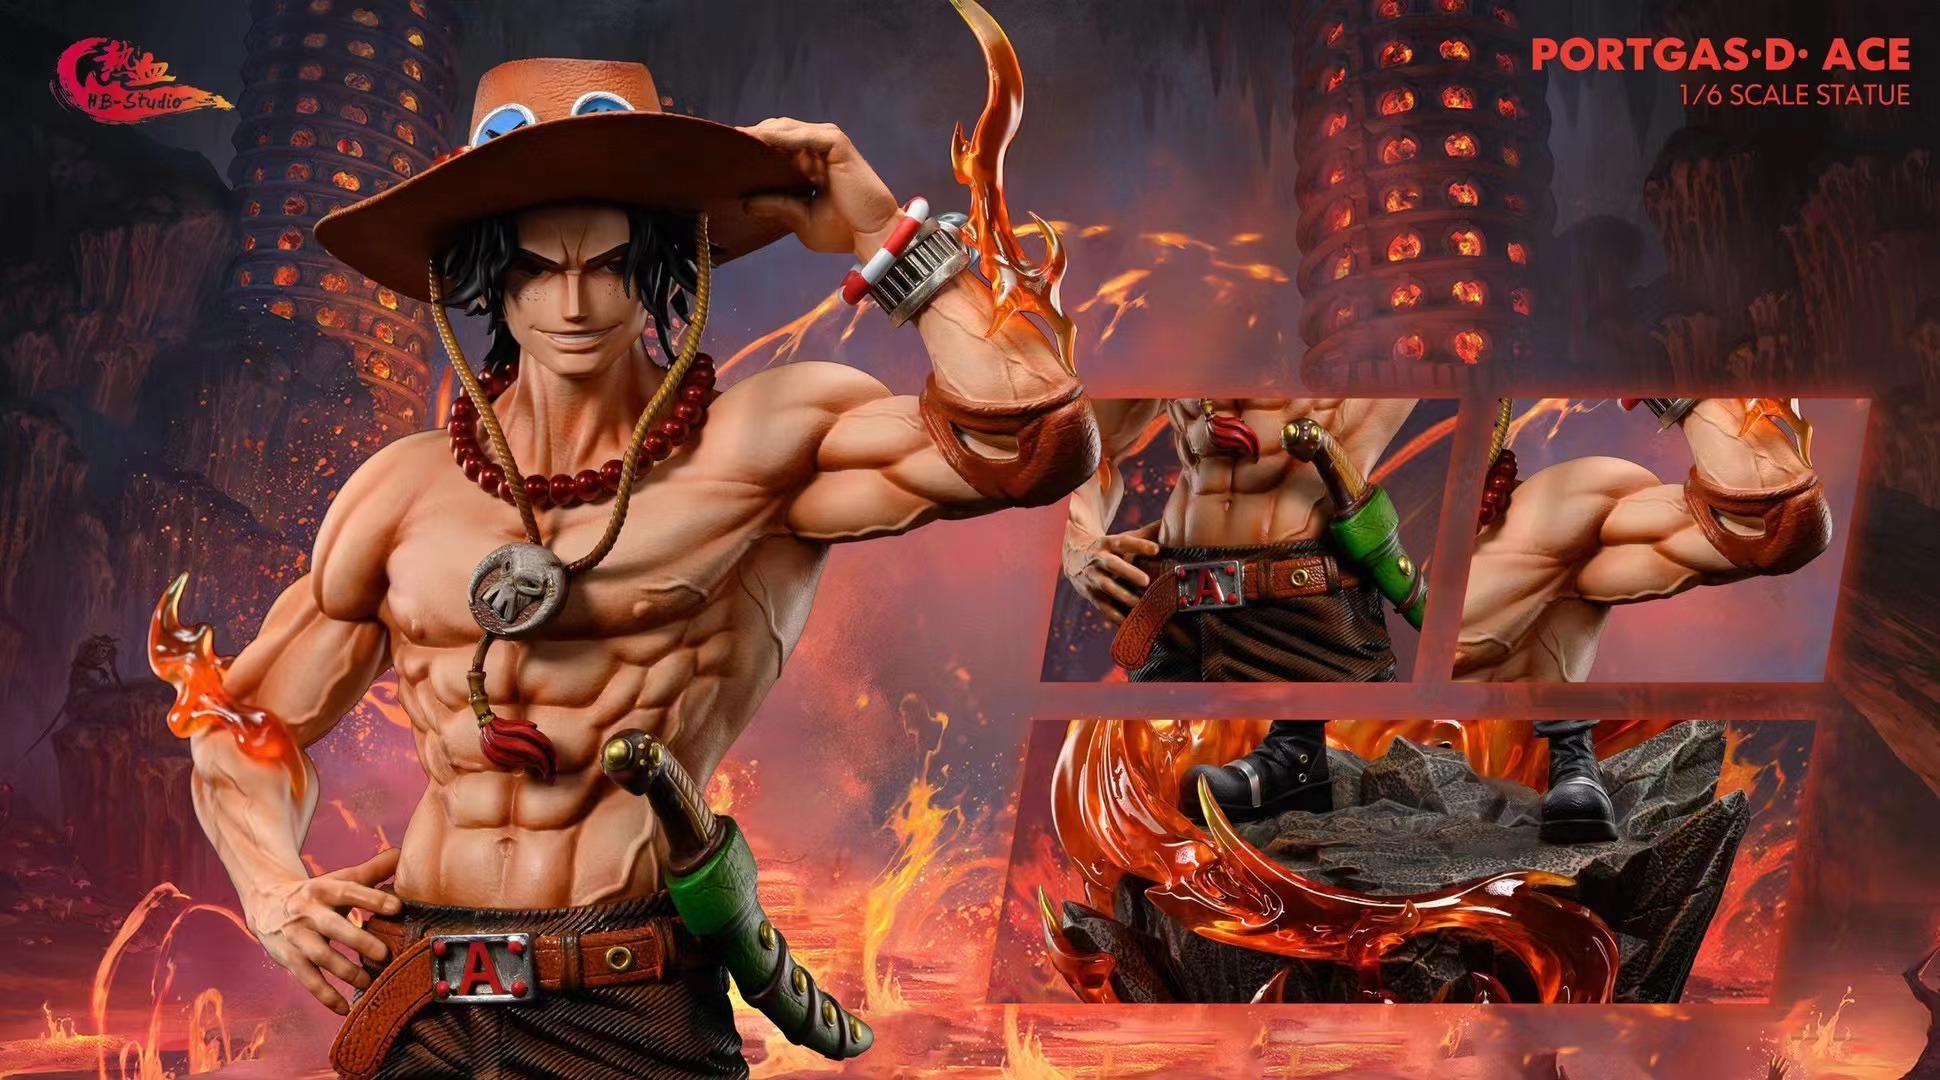 【Preorder】HB Studios ONE PIECE Portgas·D· Ace Resin Statue